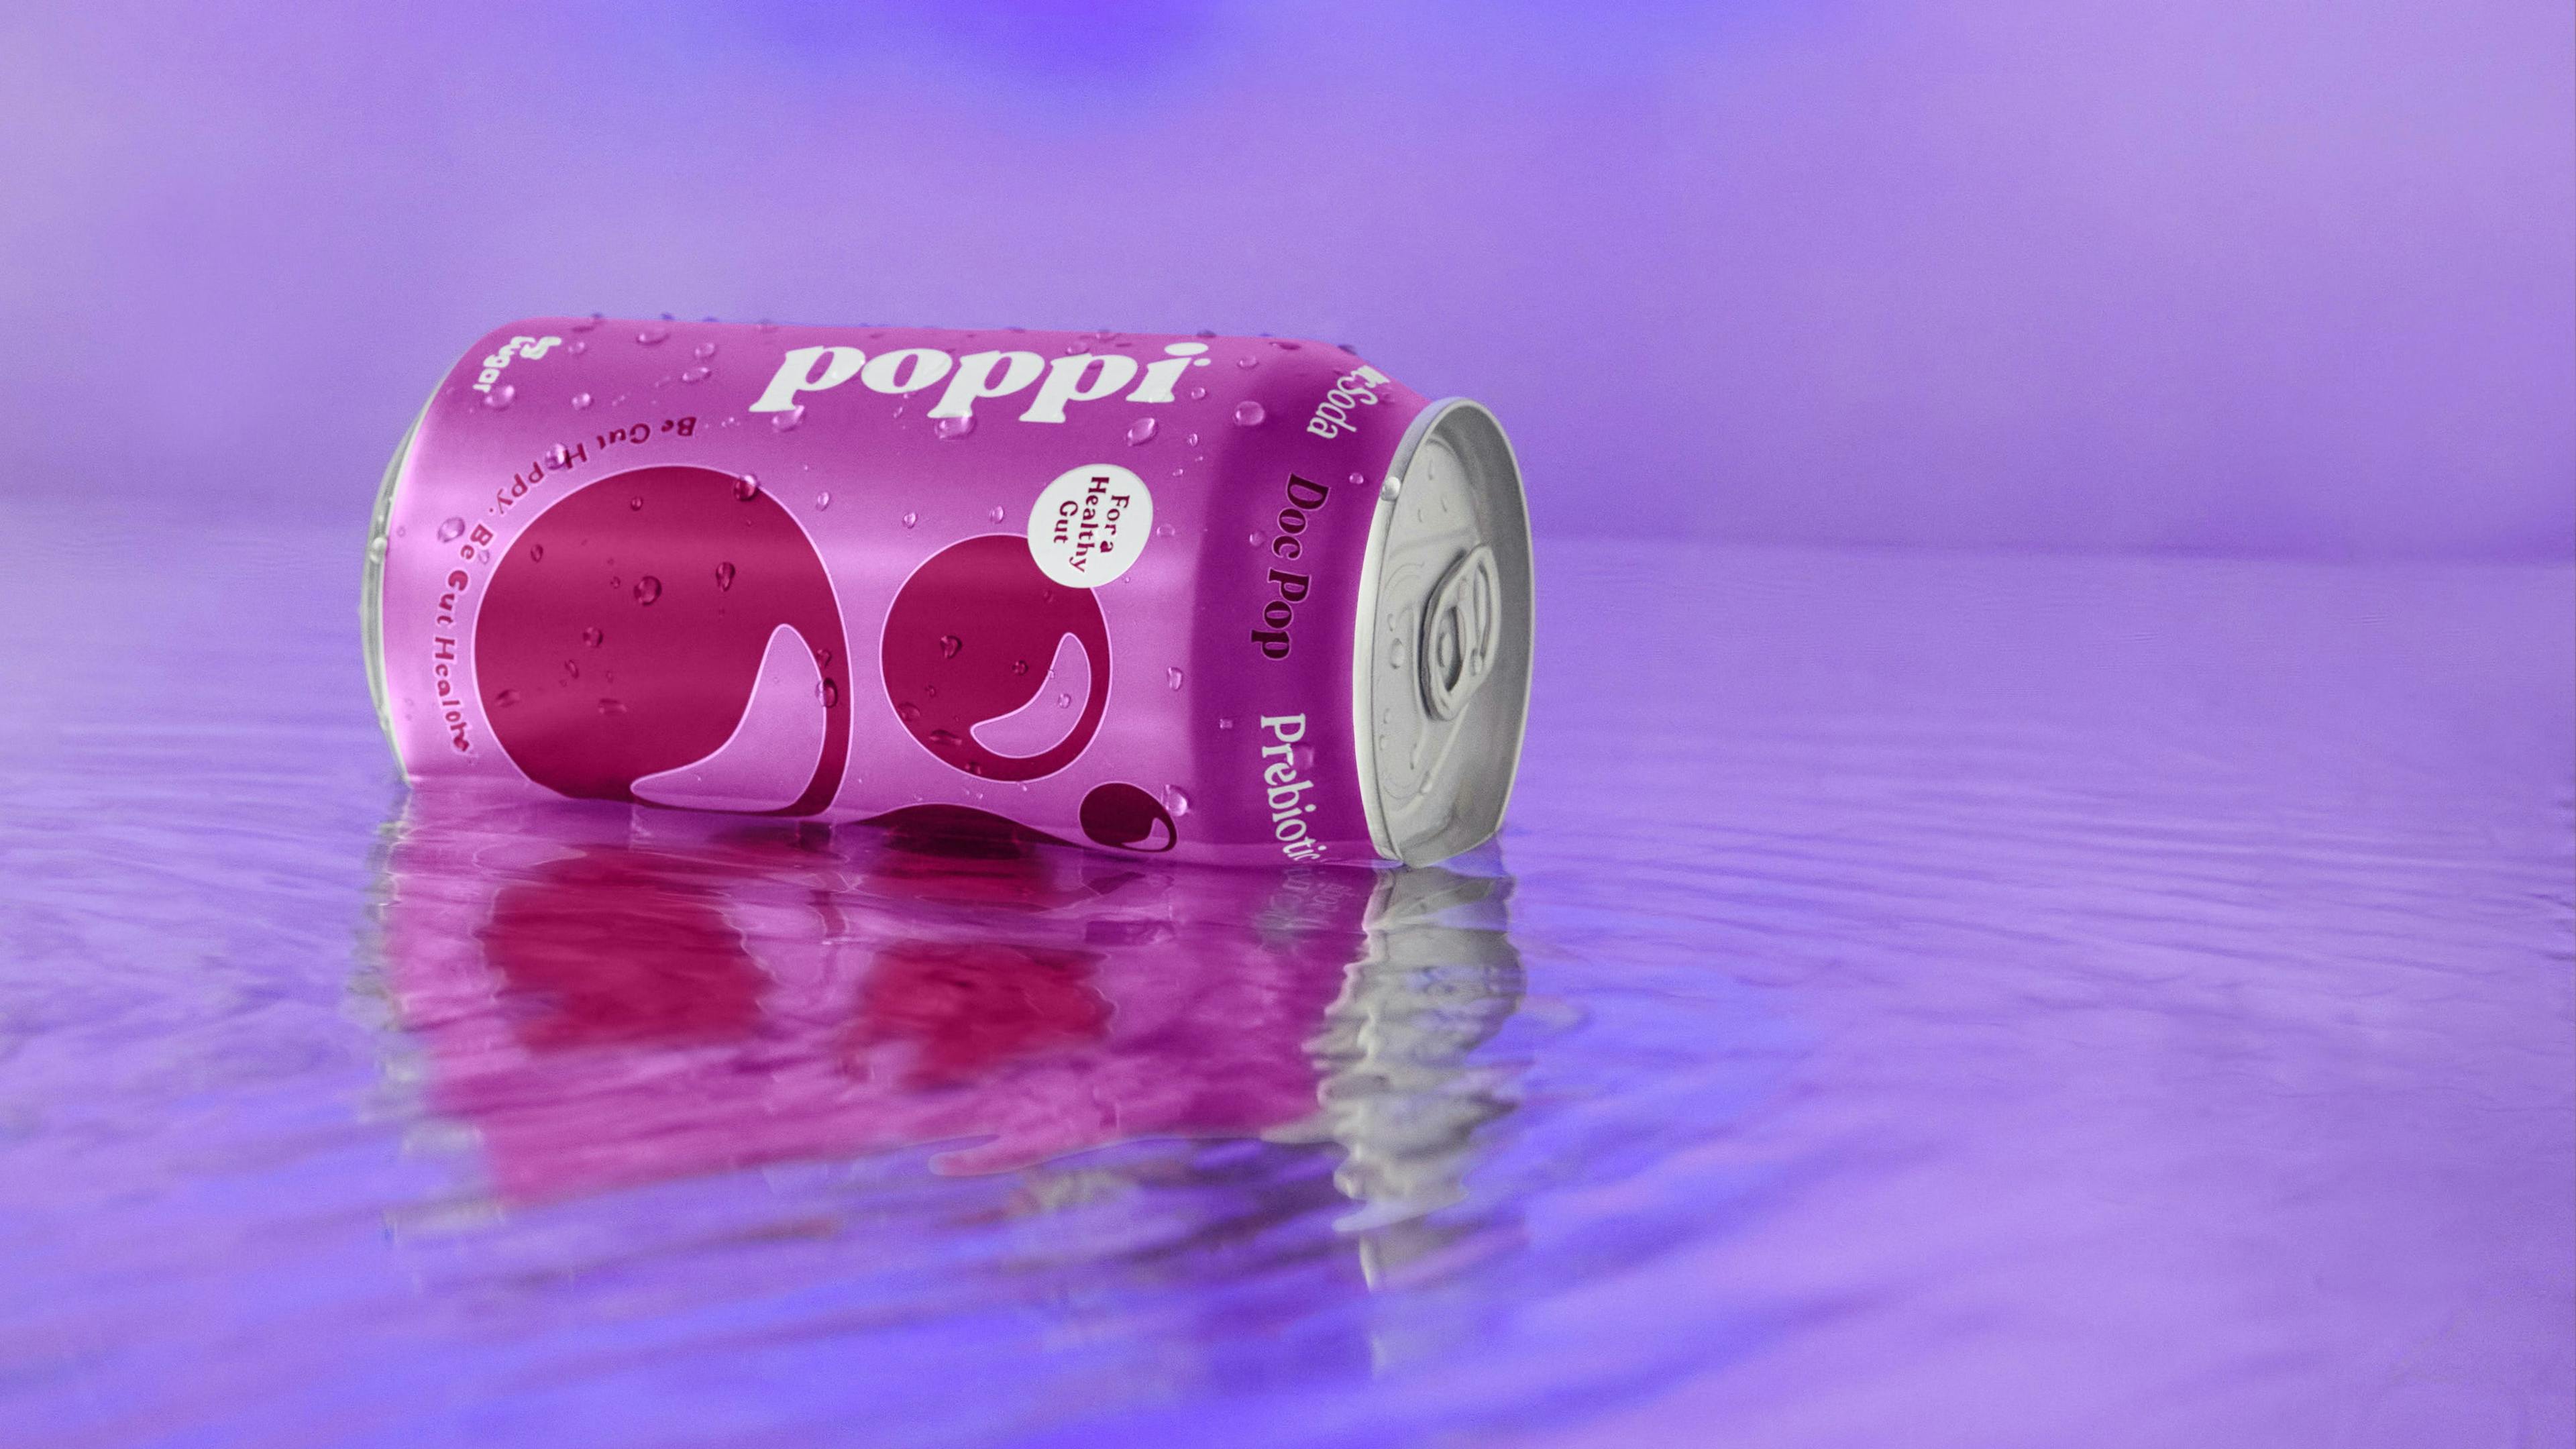 Close-up of a vibrant purple beverage can immersed in a transparent liquid, creating a captivating and colorful product photography composition